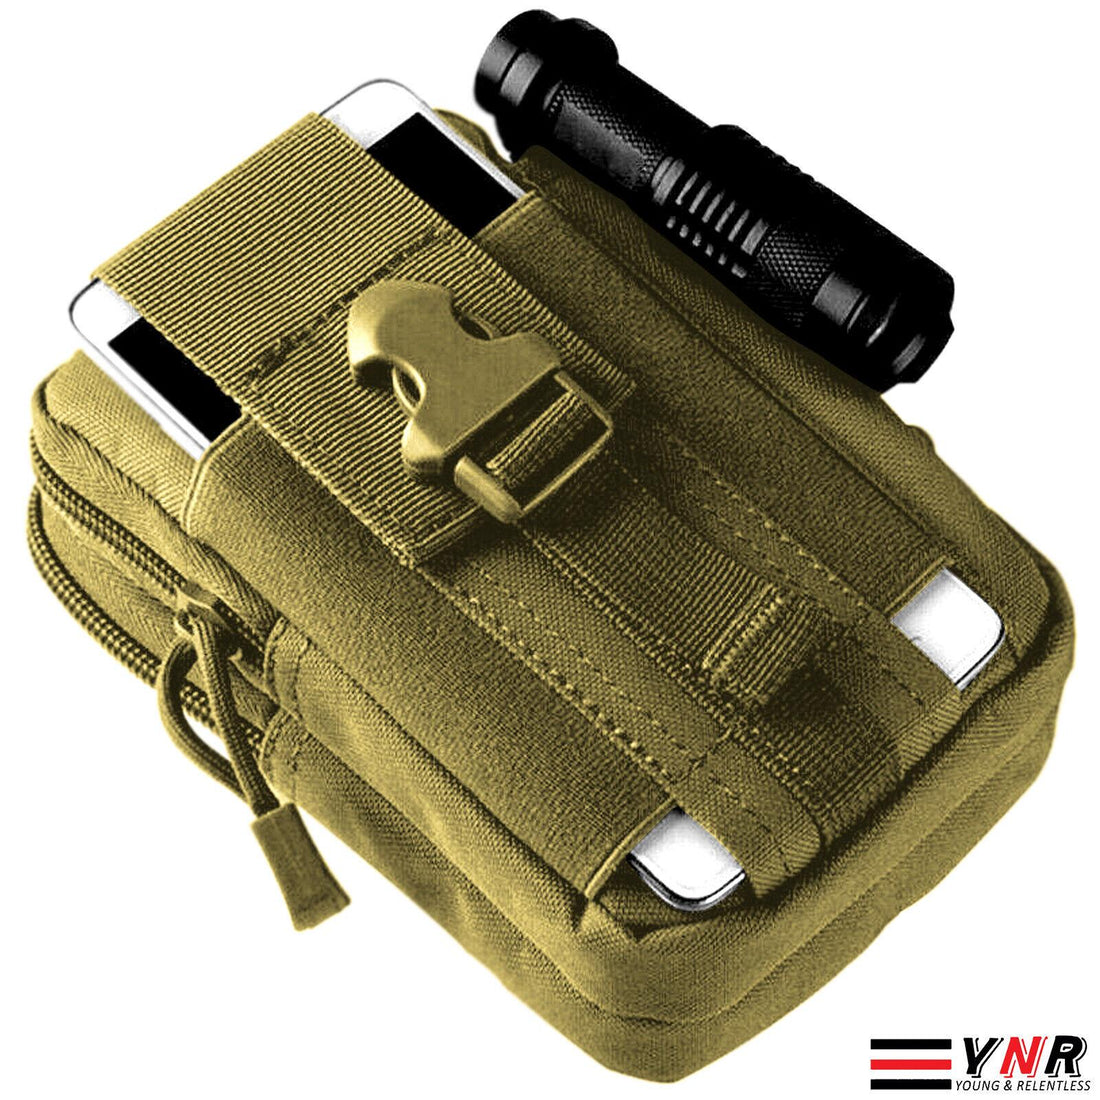 Tactical Waist Belt Bag Camping Military Molle Small Pouch Wallet Bum Hip Pack